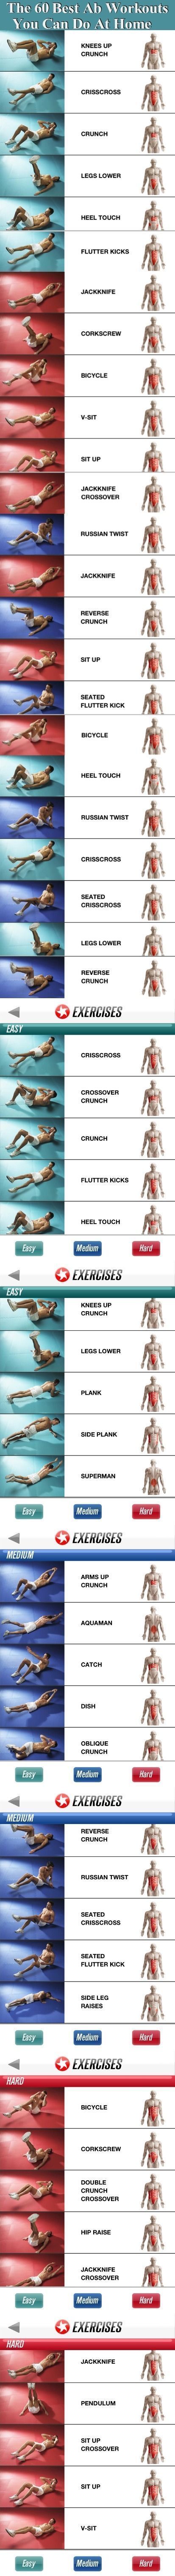 men's abs workout charts 